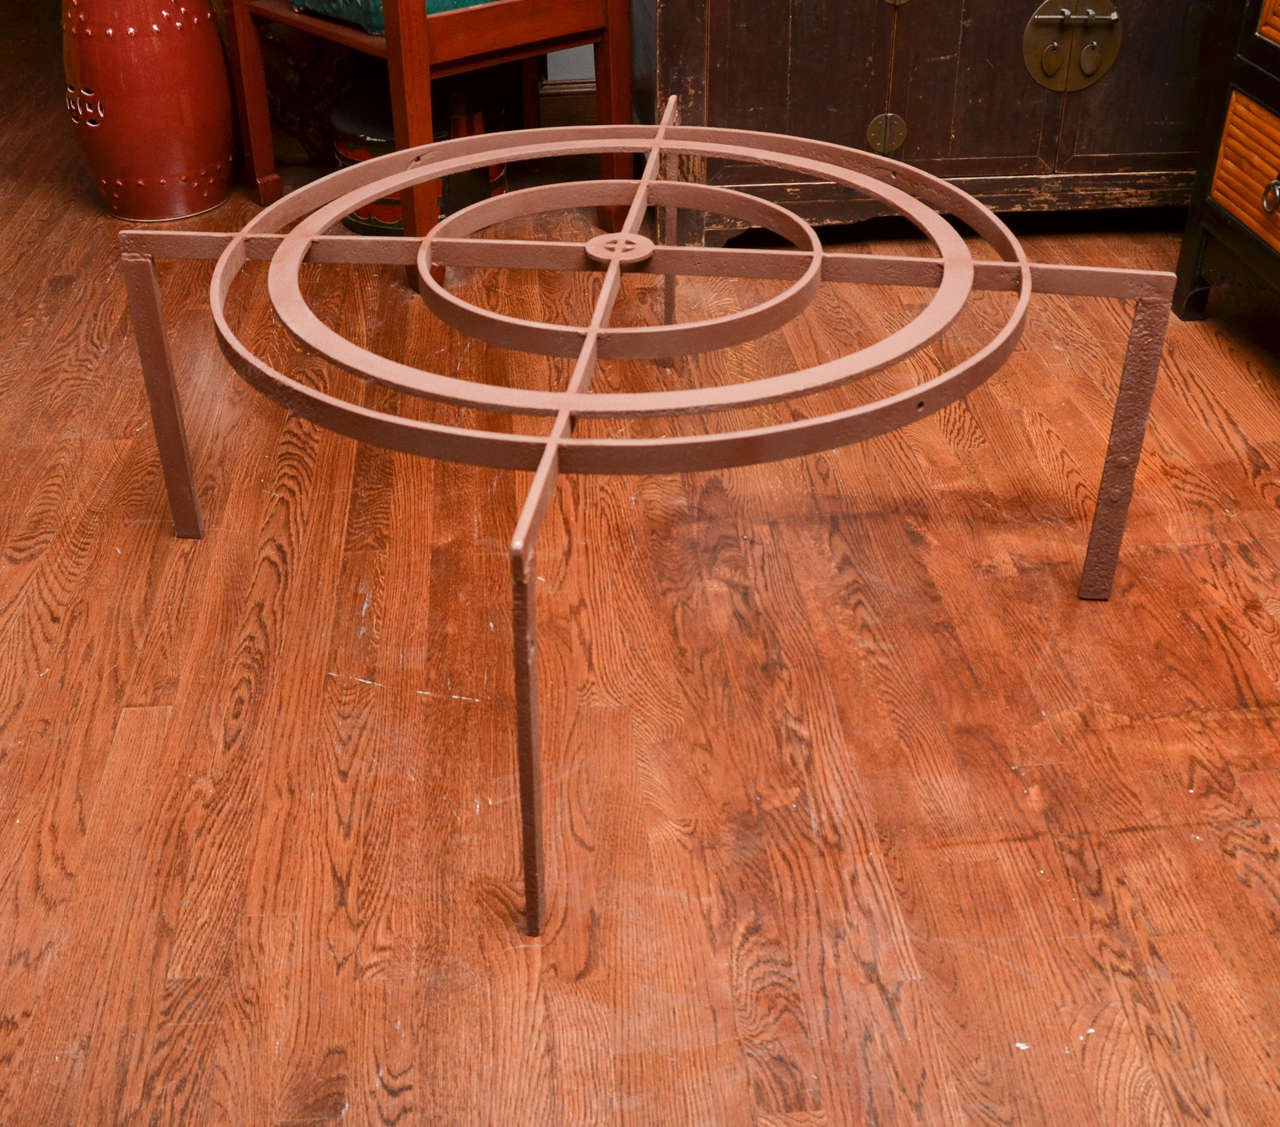 Turn of the century French iron grate coffee table in concentric circular form.